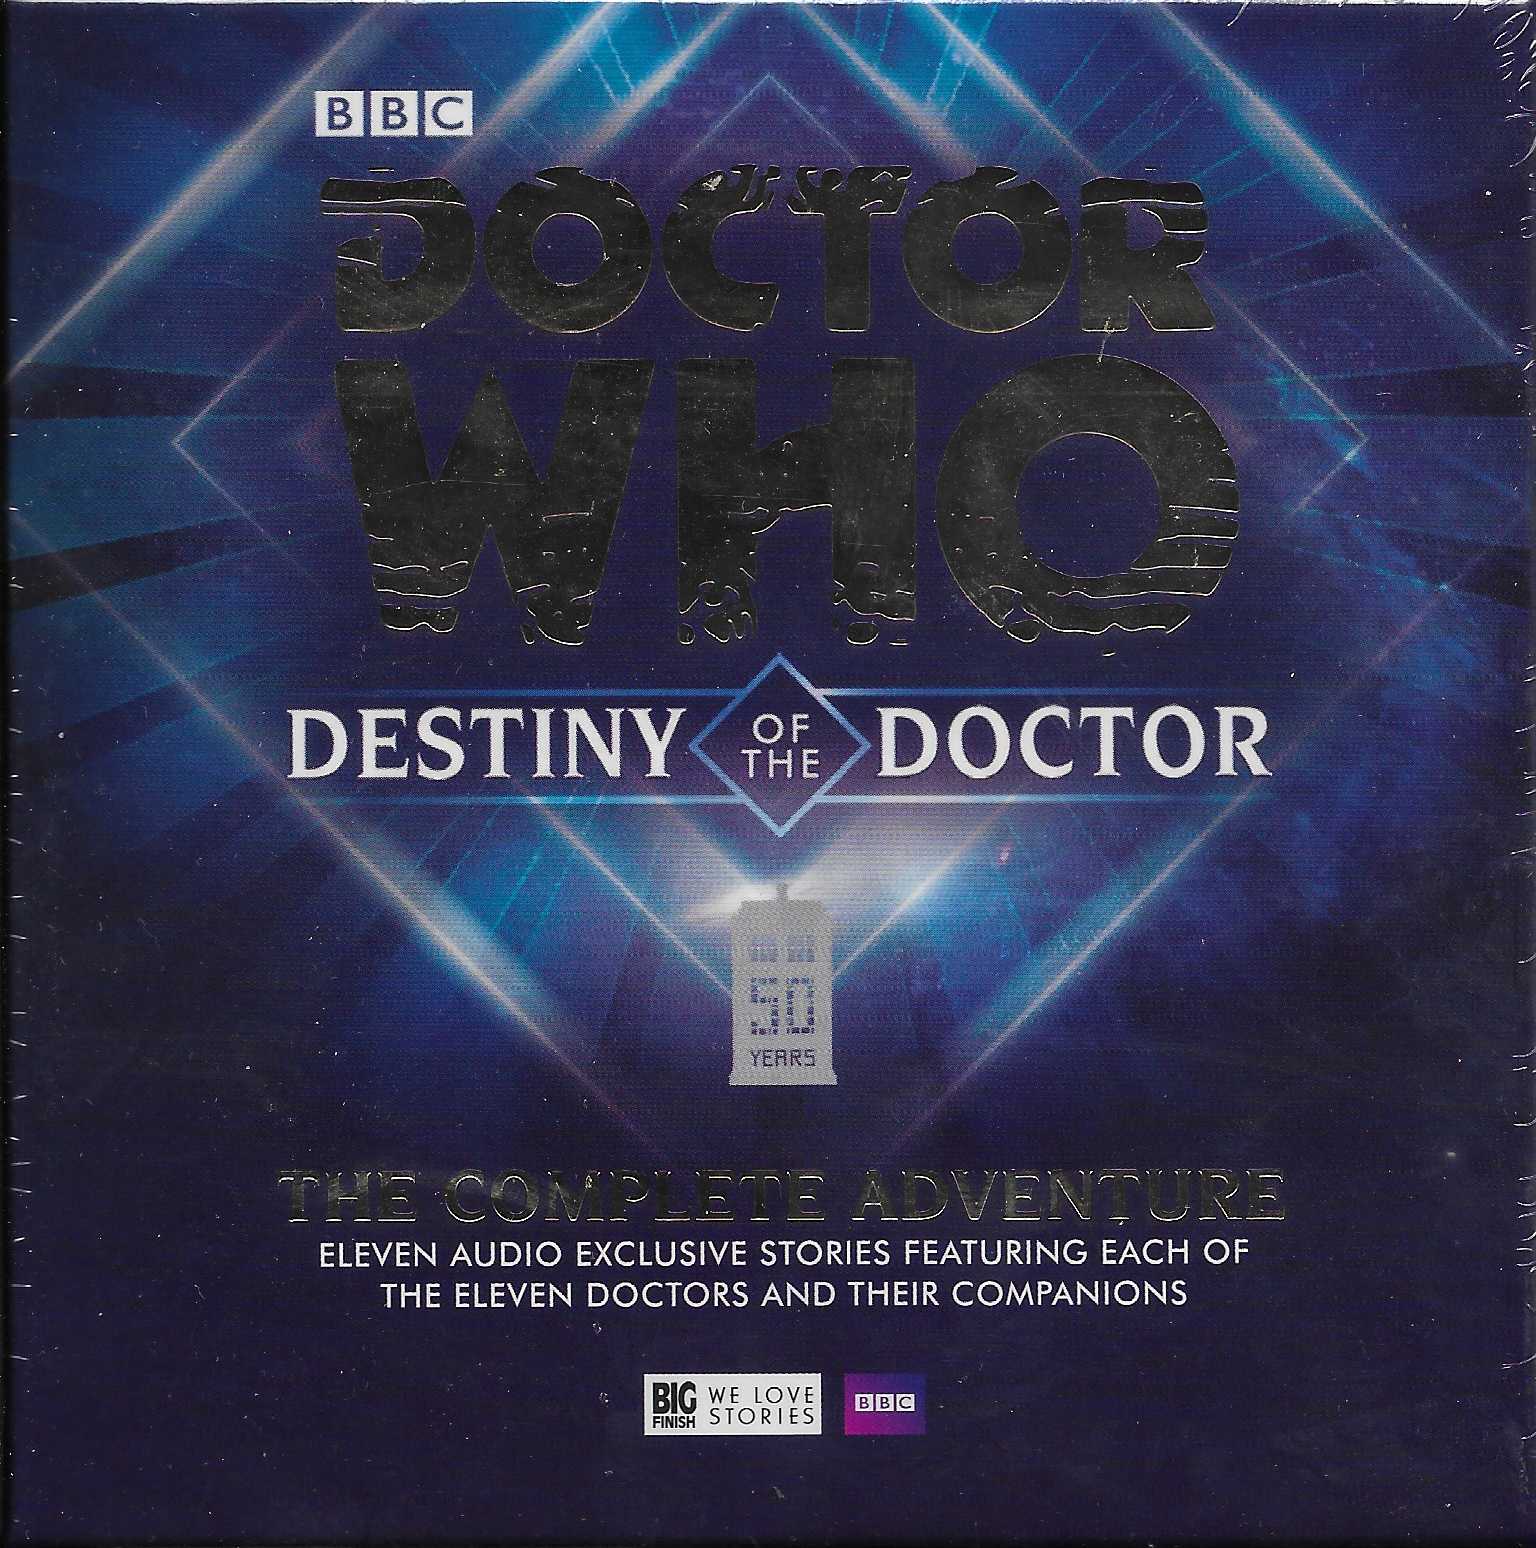 Picture of Doctor Who - Destiny of the Doctor by artist Various from the BBC cds - Records and Tapes library